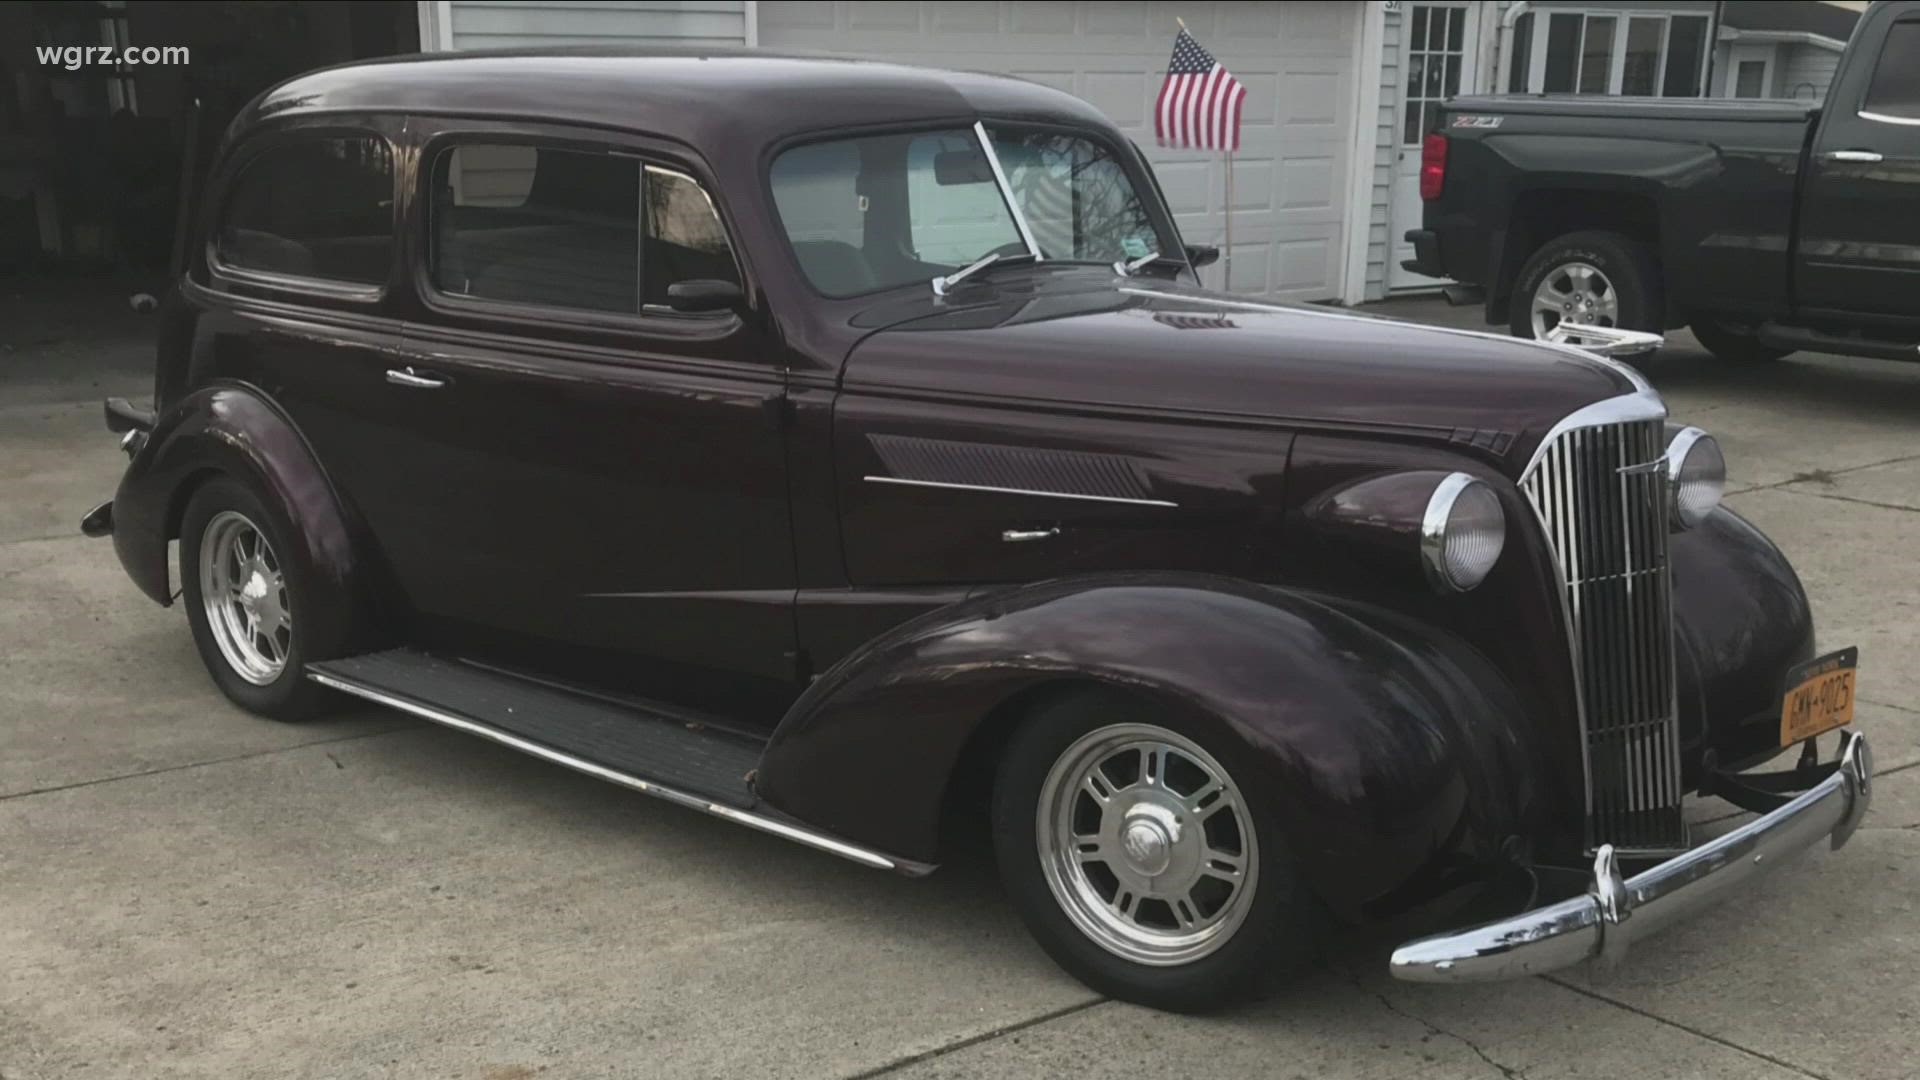 Classic 1937 car stolen from home overnight. Call City of Tonawanda 716-692-2121 with information